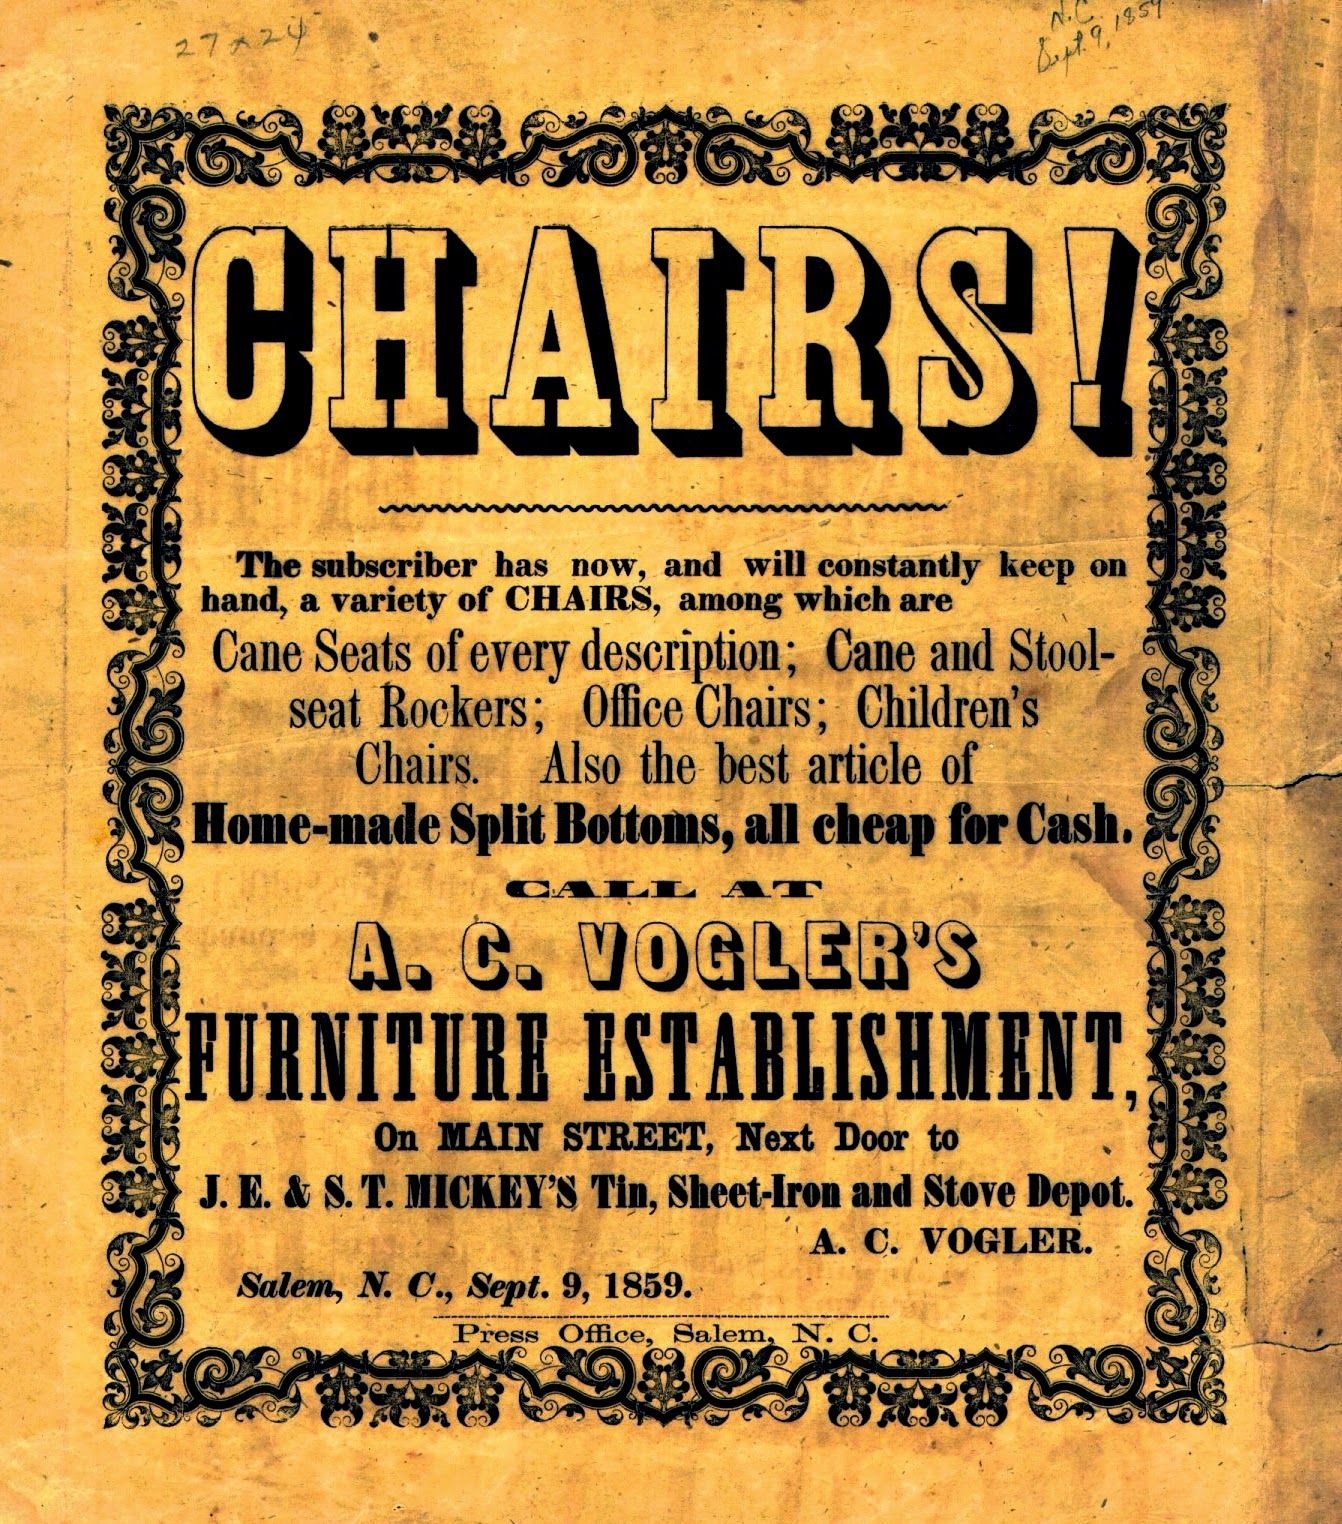 an old poster with an ornate border that reads: “Chairs! The subscriber has now, and will constantly keep on hand, a variety of chairs, among which are cane seats of every description; cane and stool seat rockers; office chairs; children’s chairs. Also the best article of home-made split bottoms, all cheap for cash. Call at A. C. Vogler’s Furniture Establishment, on Main Street, next door to J. E. & S. T. Mickey’s Tin, Sheet-Iron and Stove Depot. A. C. Vogler. Salem, N. C., Sept. 9, 1859.”